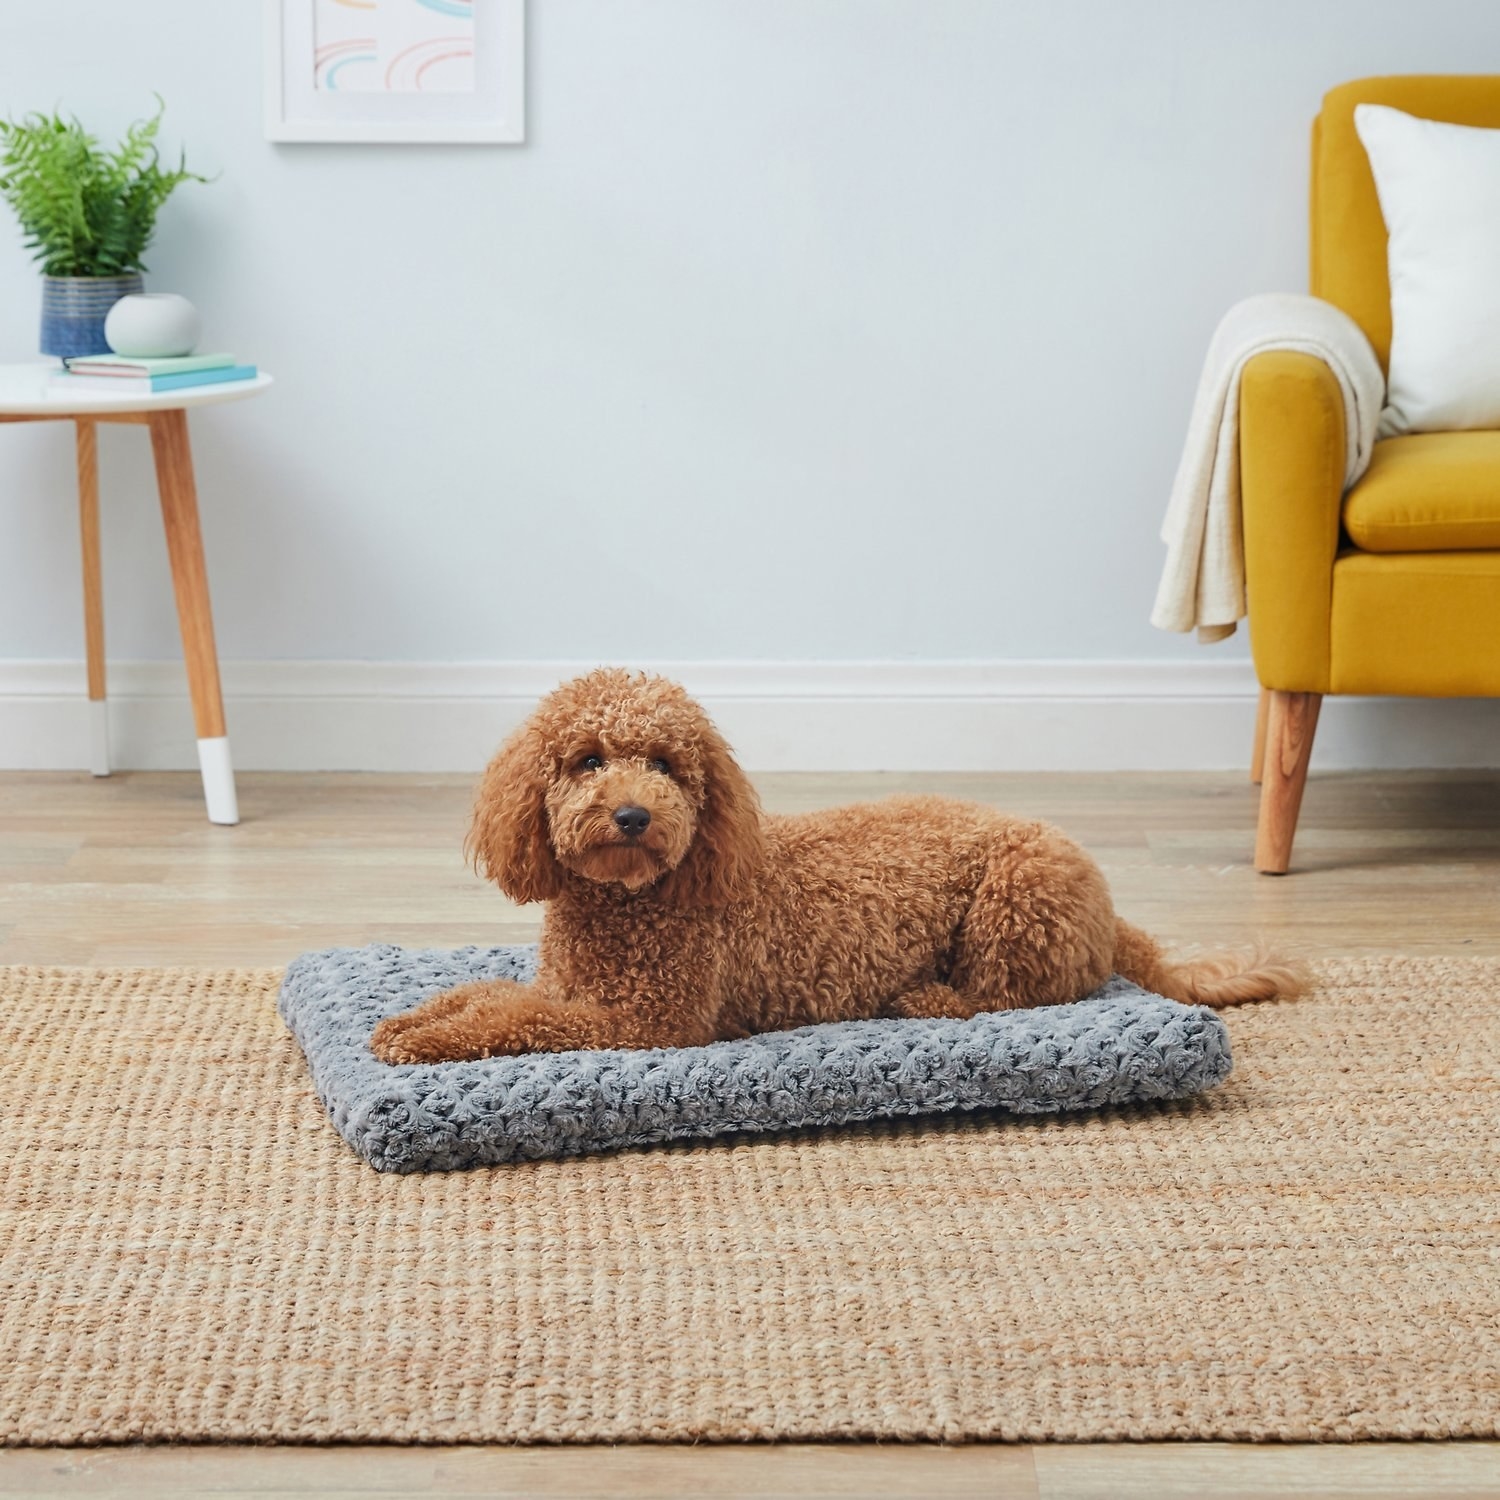 Dog on knitted mat 